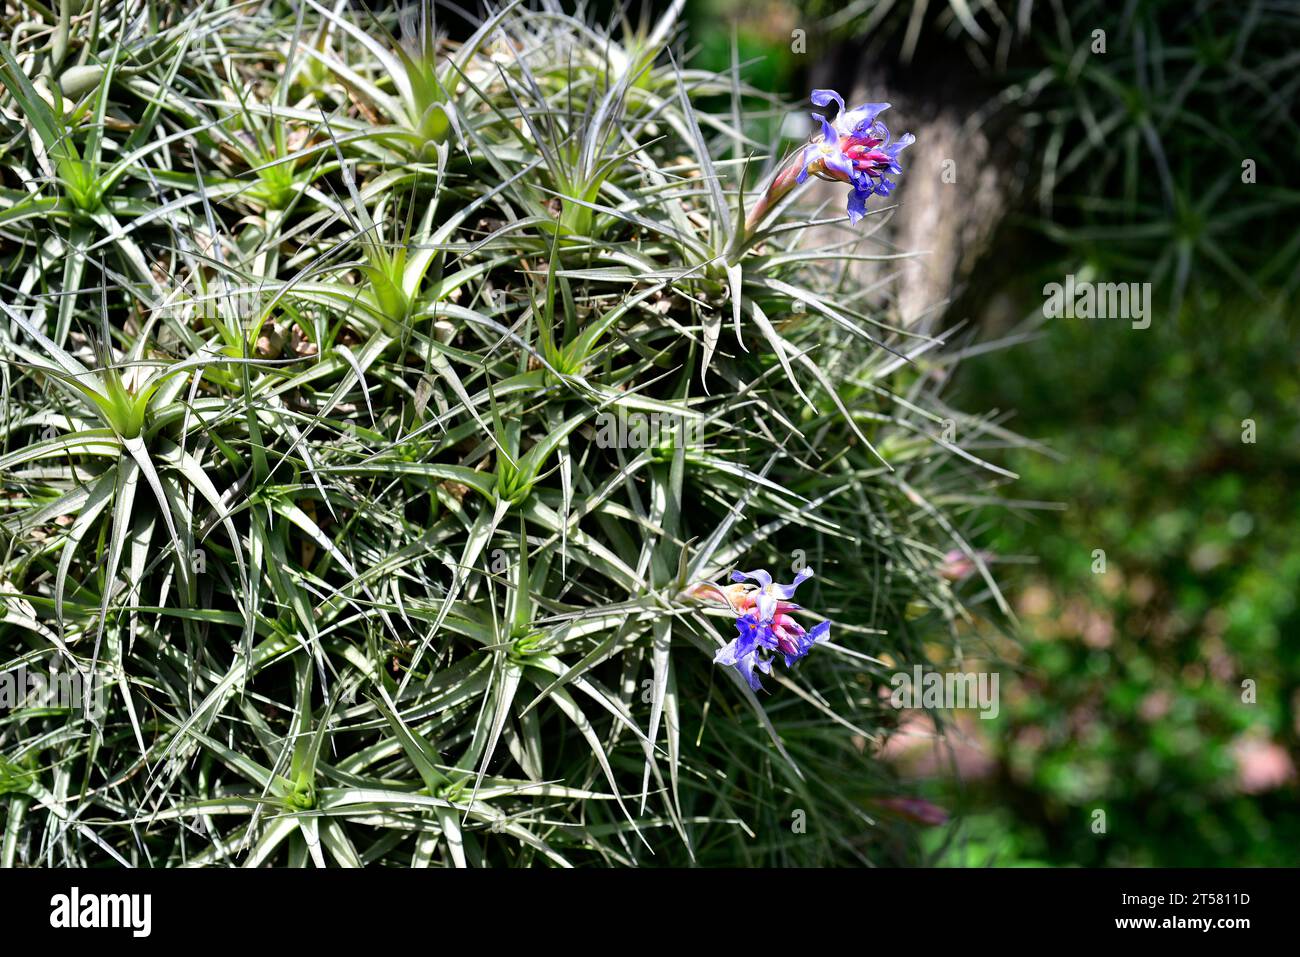 Clavel de aire (Tillandsia aeranthos) is an epiphytic plant native to South America (Brazil, Argentina, Paraguay and Uruguay). Stock Photo